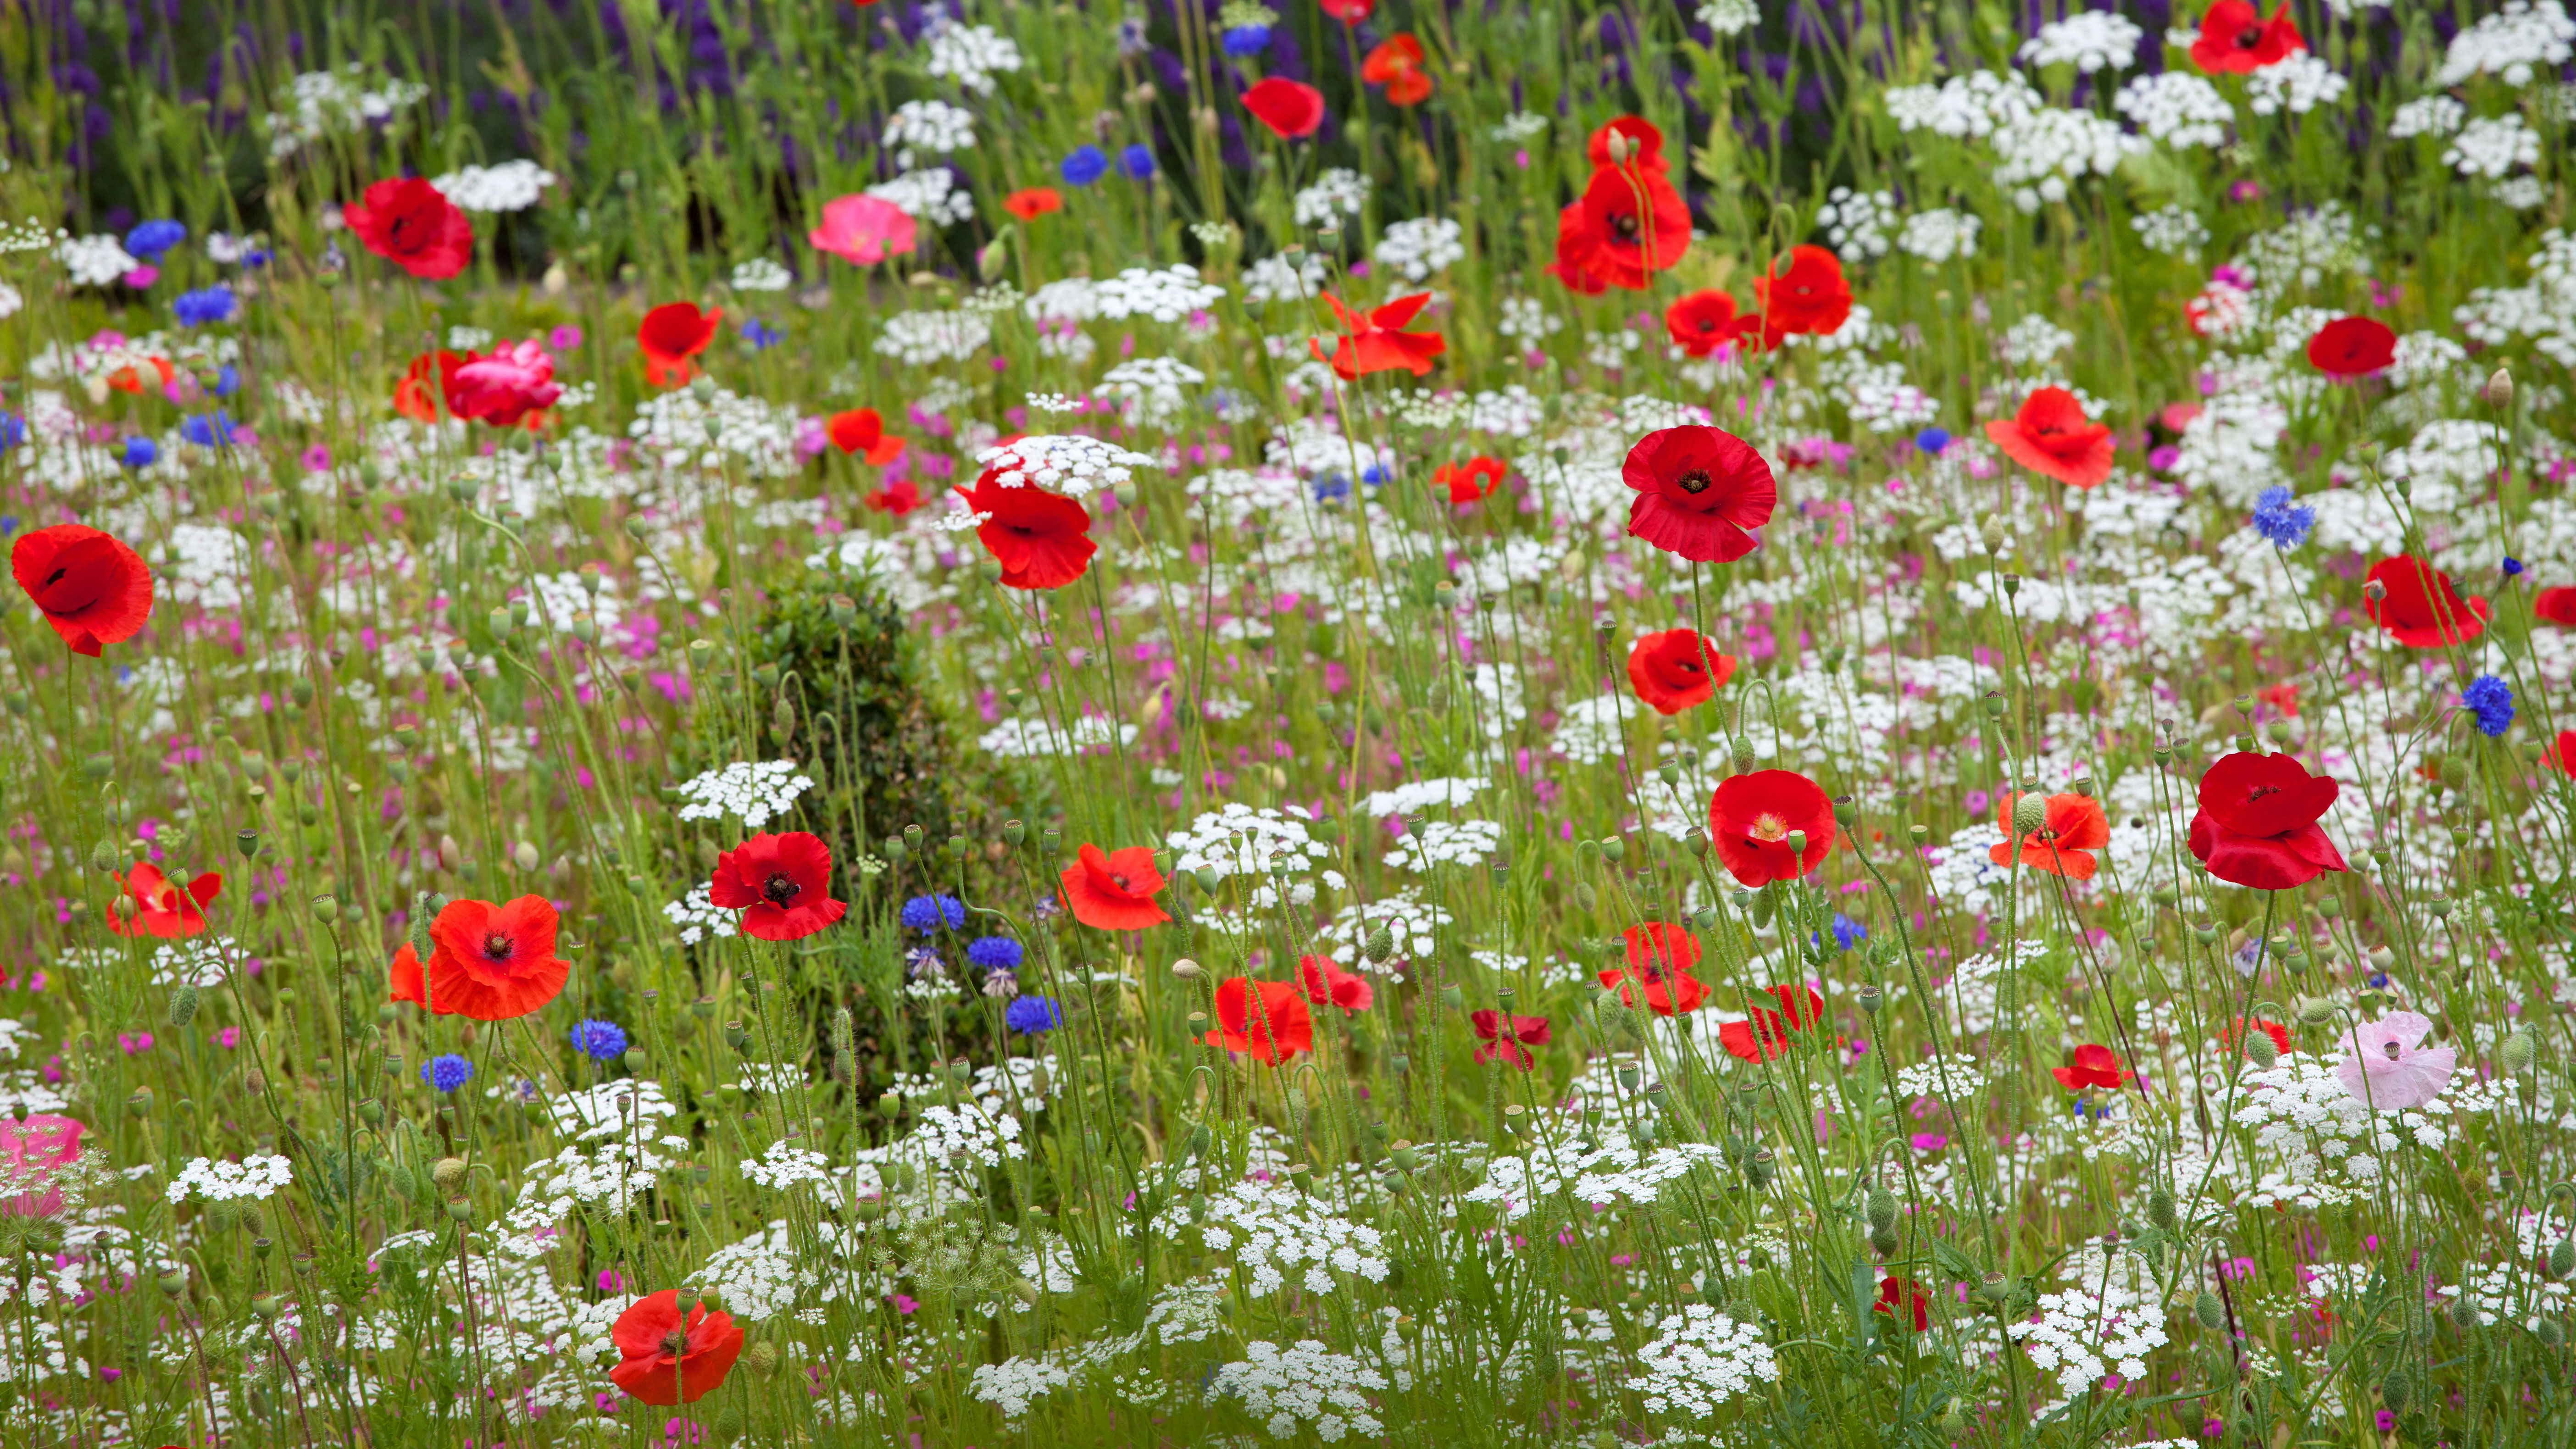 How To Grow & Care for your Poppies